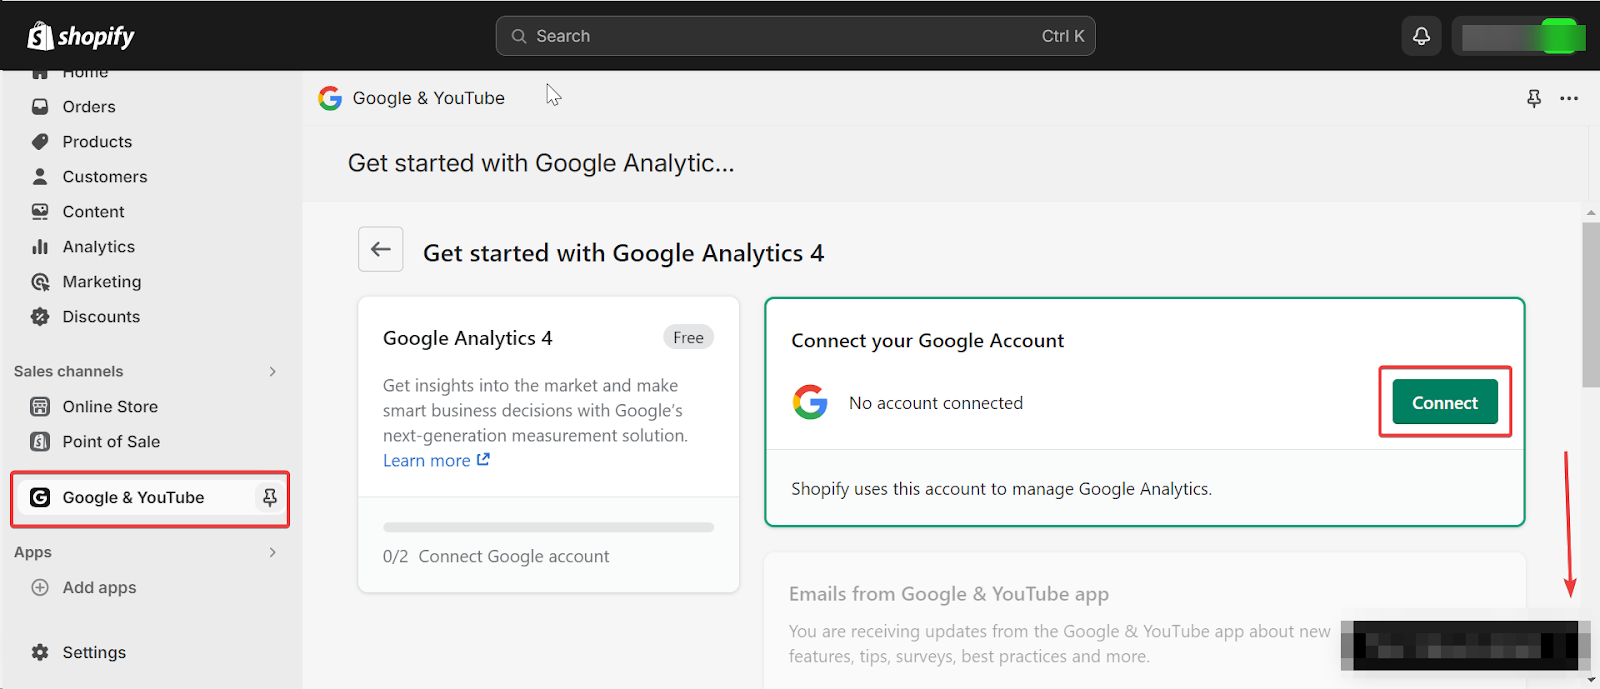 Getting Started with Google Analytics on Shopify